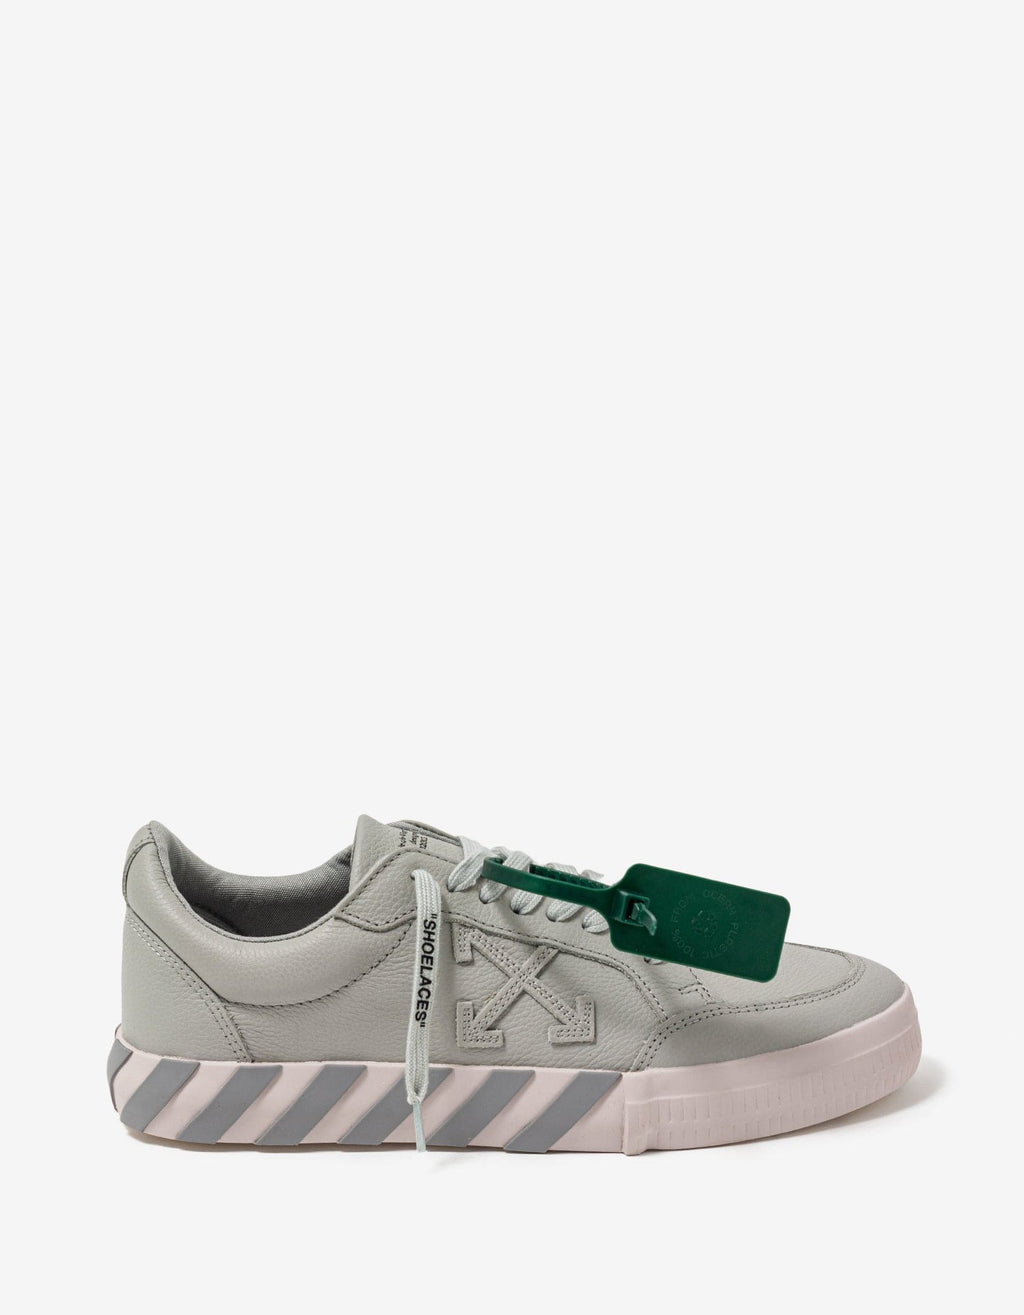 Off-White c/o Virgil Abloh Grey Low Vulcanized Trainers